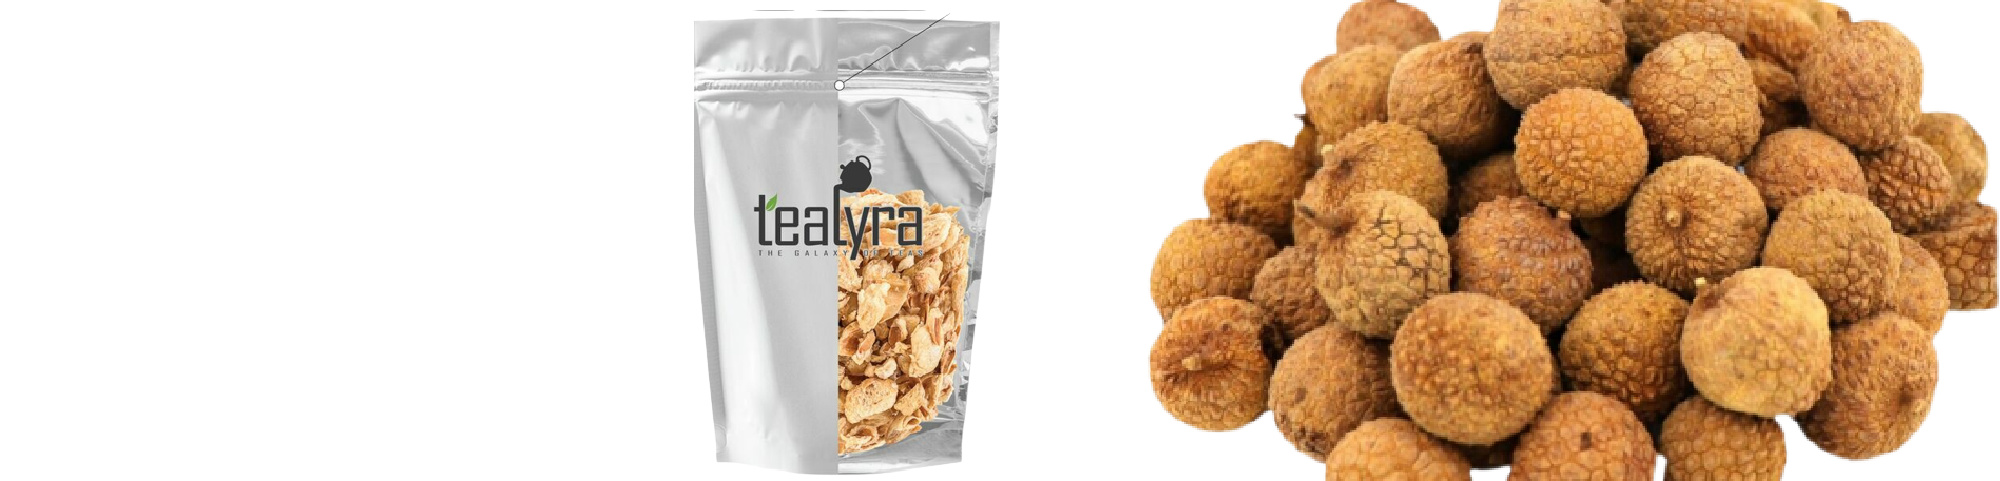 image of tealyra freeze dried lychee